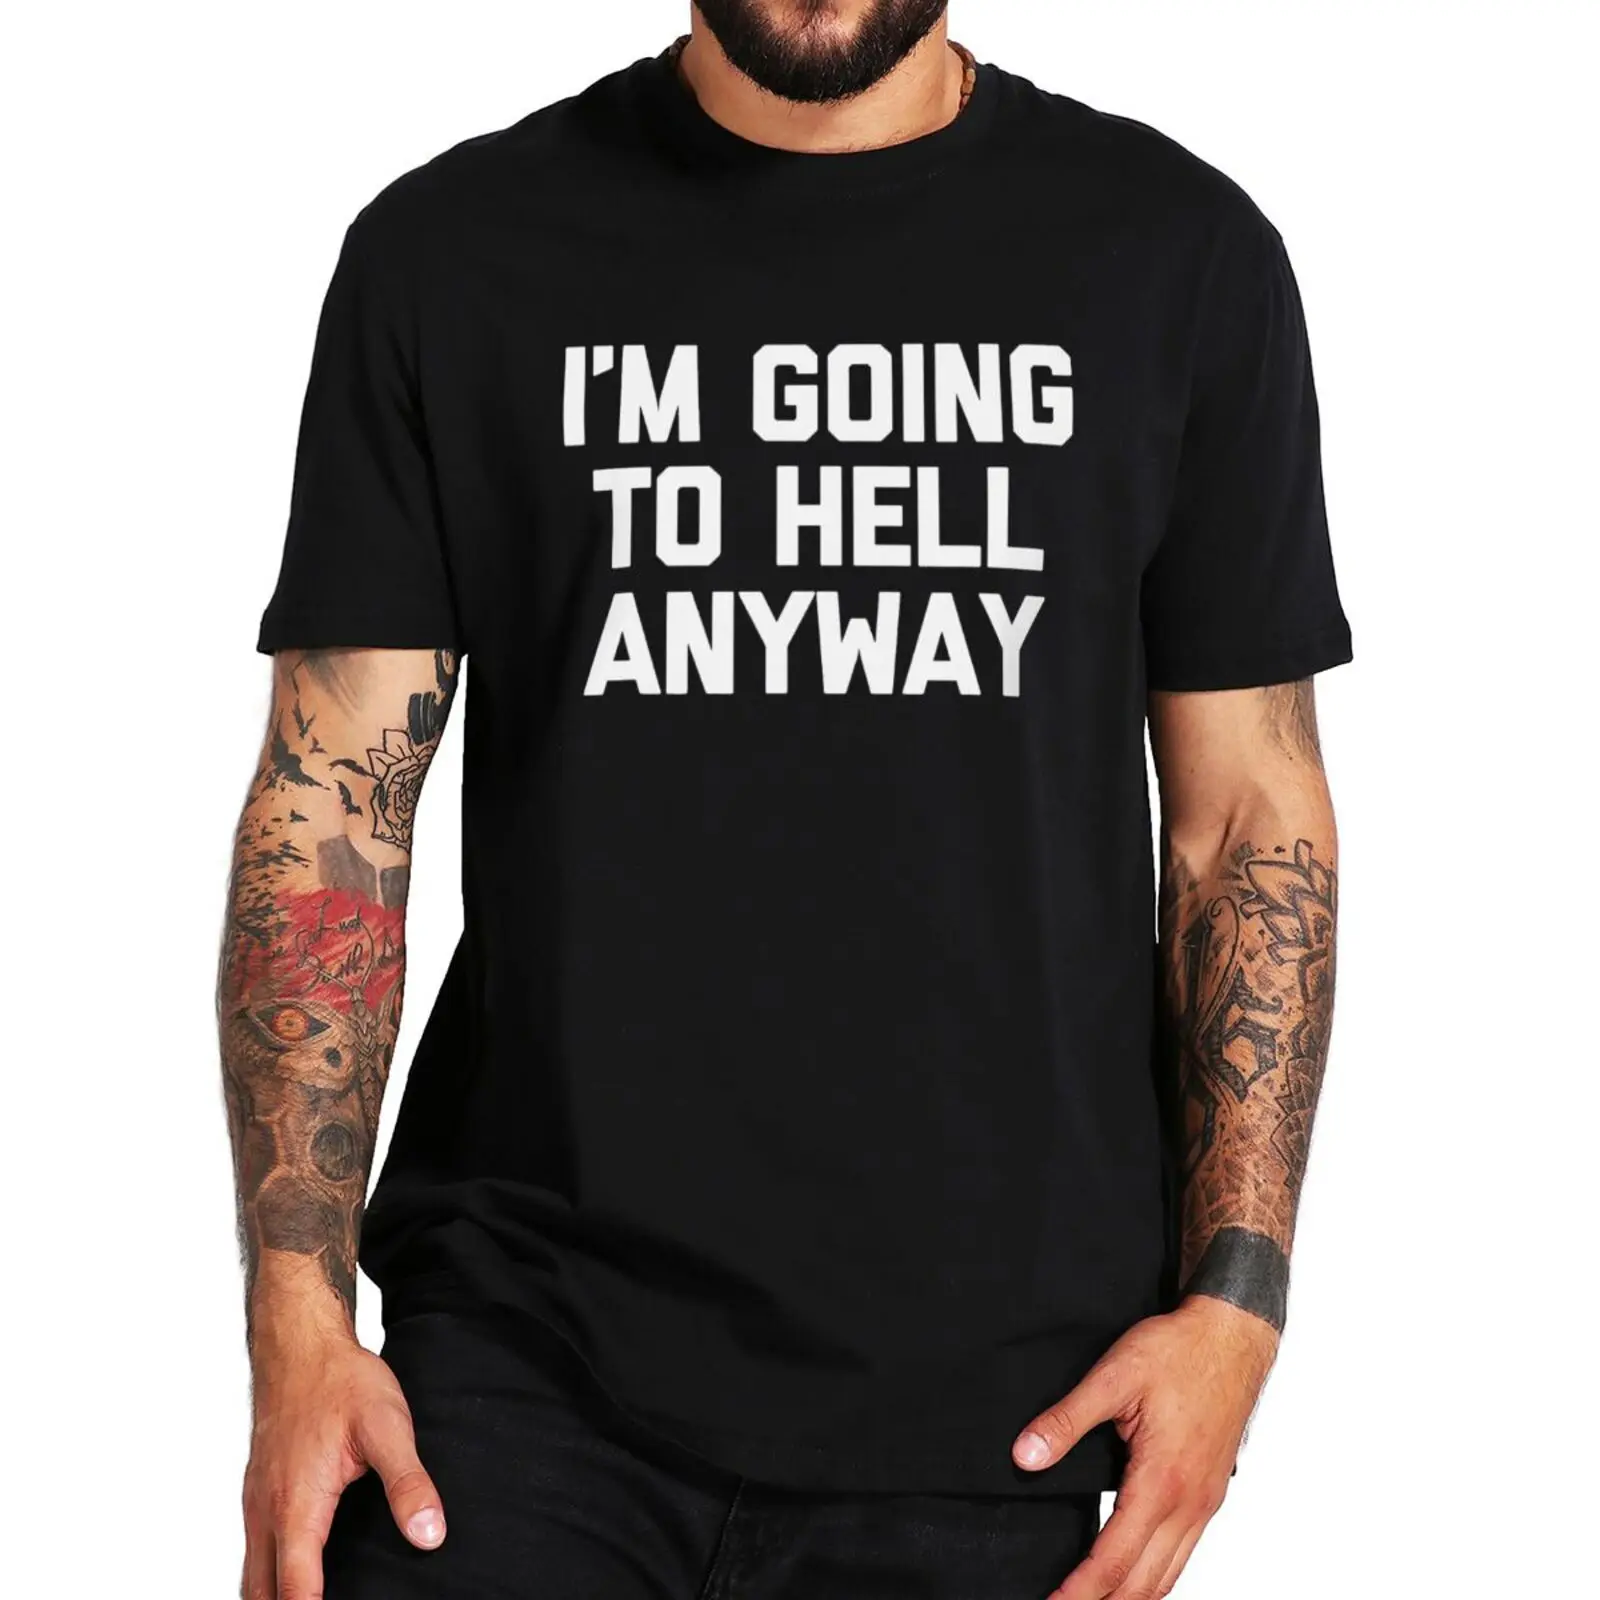 

I'm Going To Hell Anyway T Shirt Funny Saying Cool Sarcastic Humor Men Women Tshirts Summer 100% Cotton Soft T-shirt